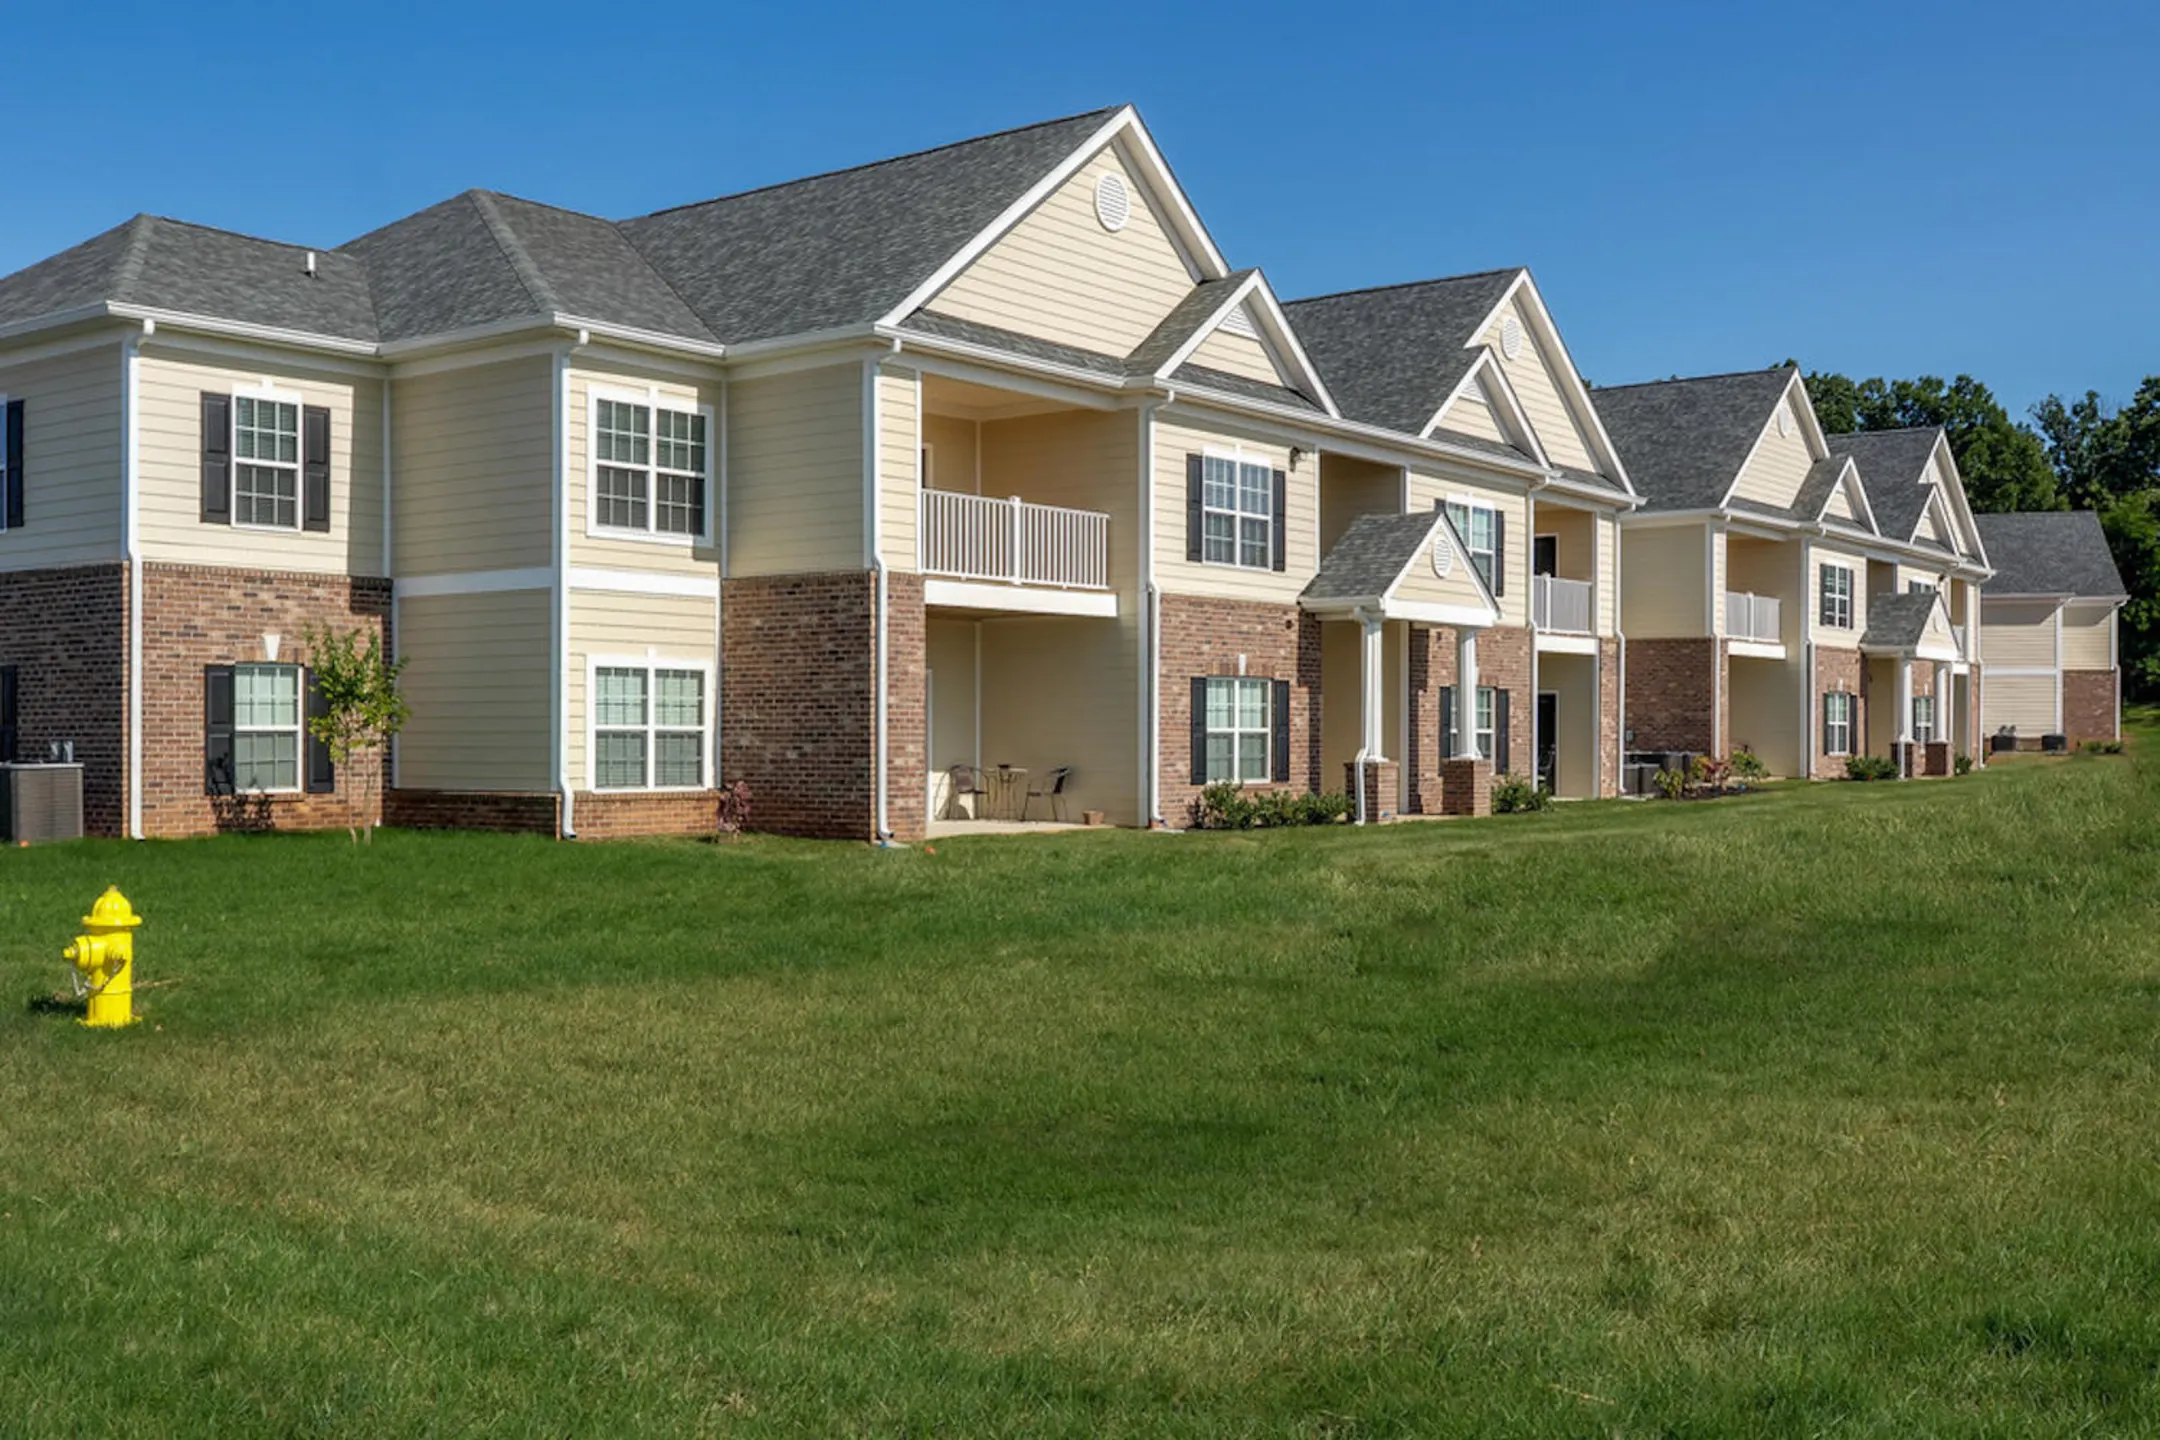 Building - Cumberland Trace Village Apartments - Bowling Green, KY